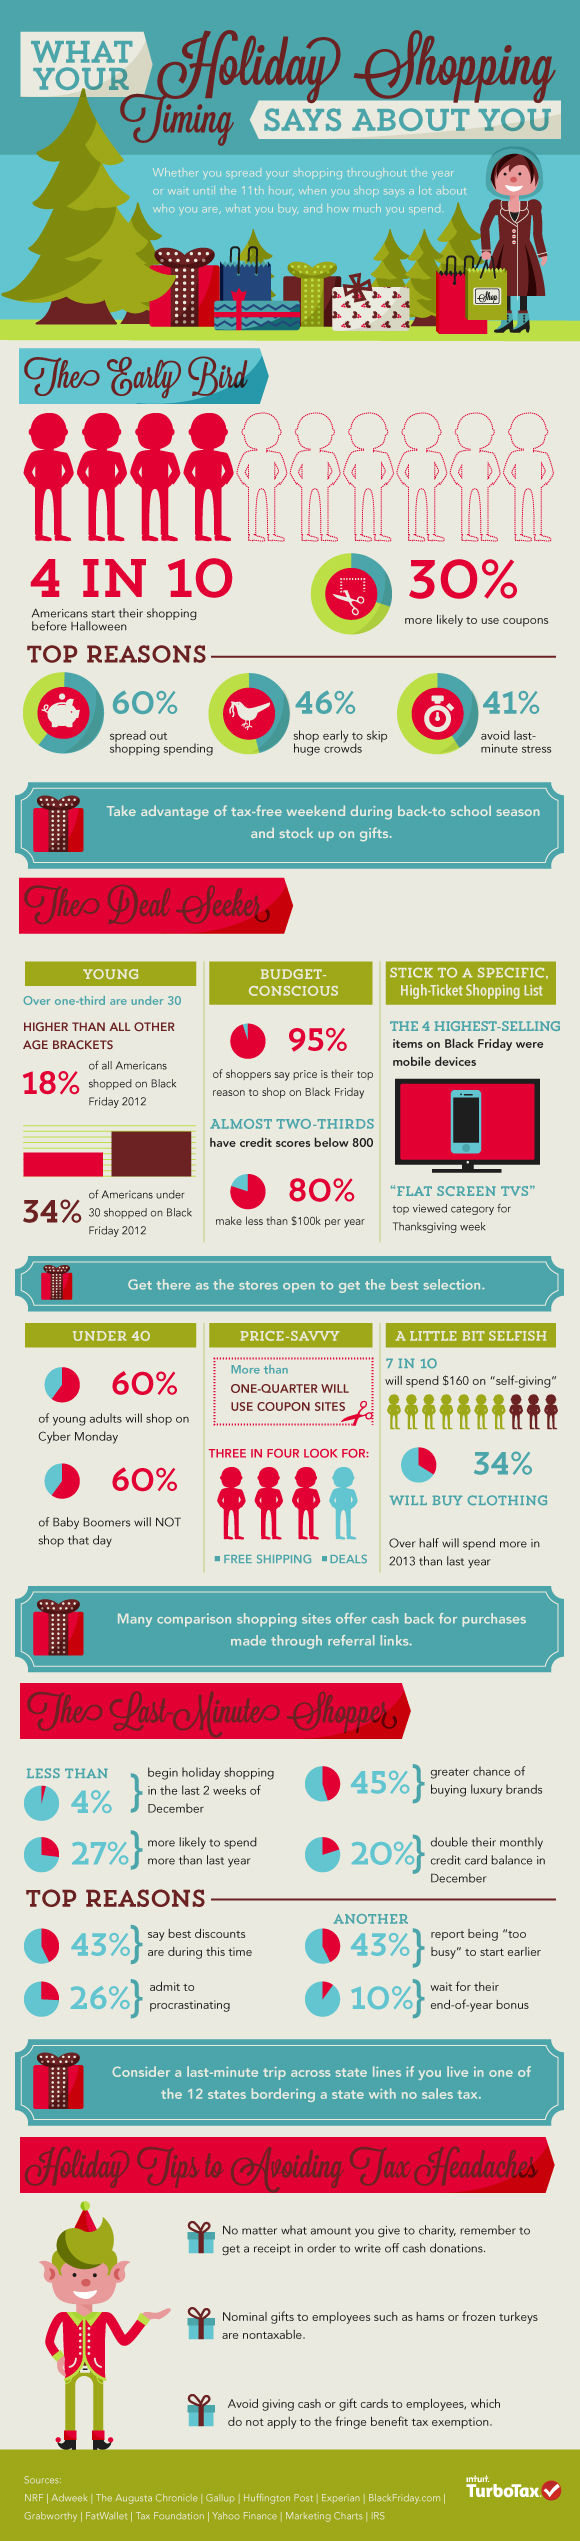 What Your Holiday Shopping Time Says About You (Infographic)